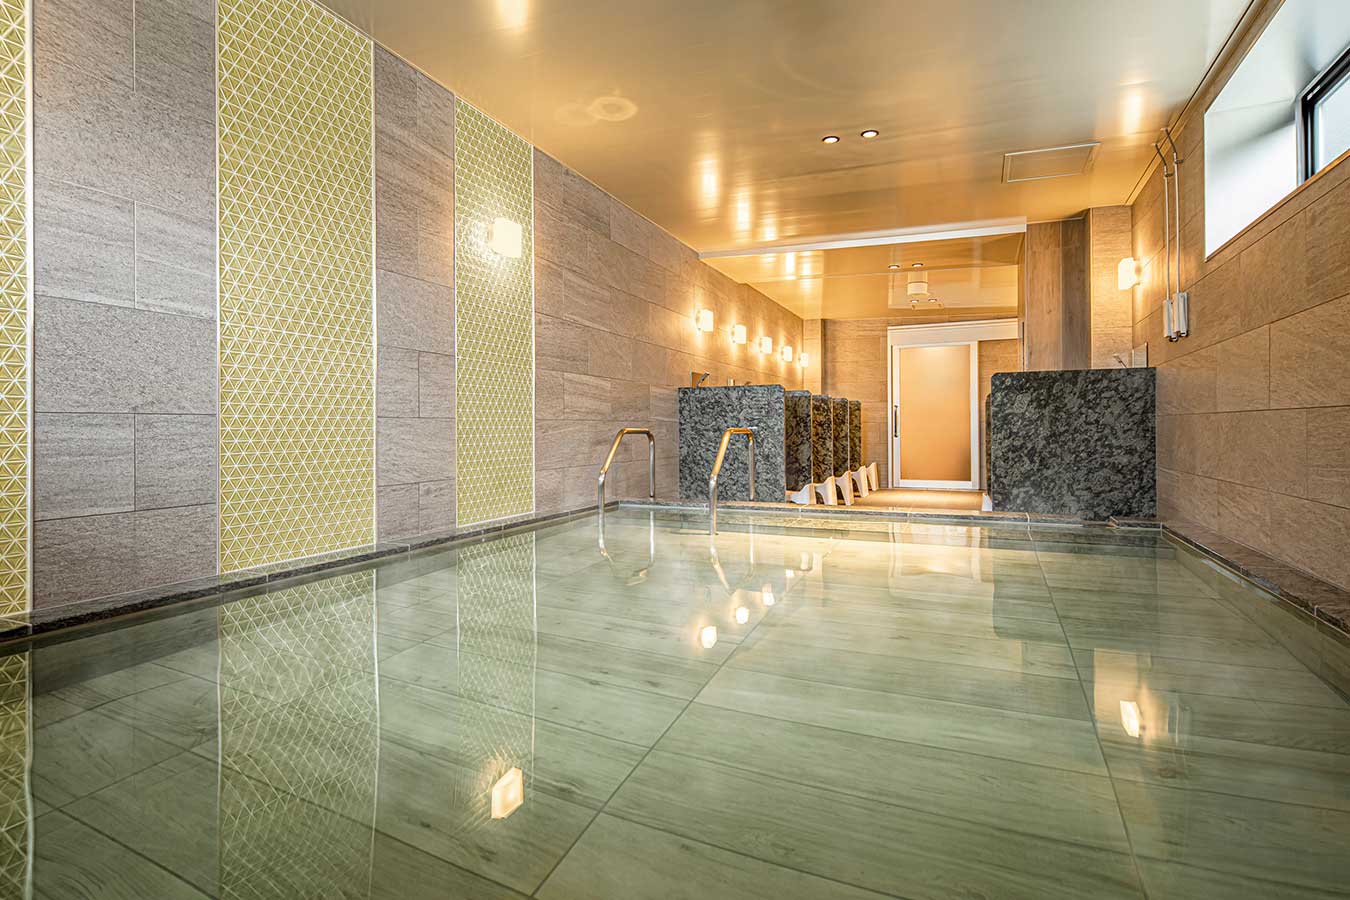 Large communal bath for relaxation (4th floor)